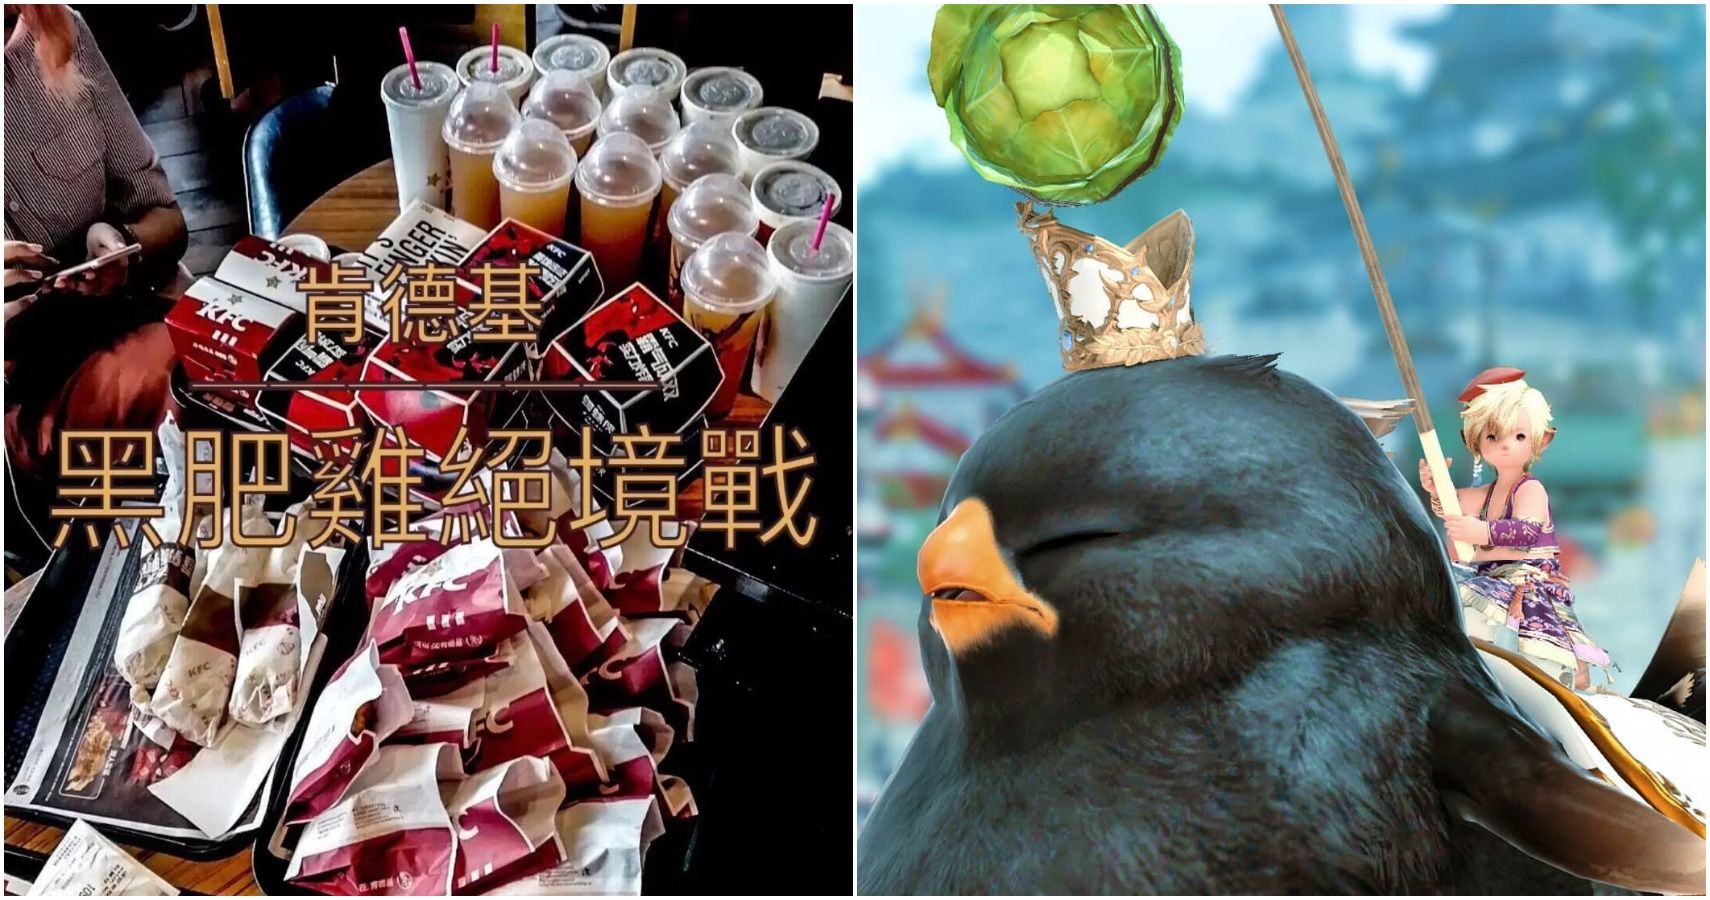 Chinese KFC Offers FF14 Chocobos To Players That Can Eat A Ludicrous